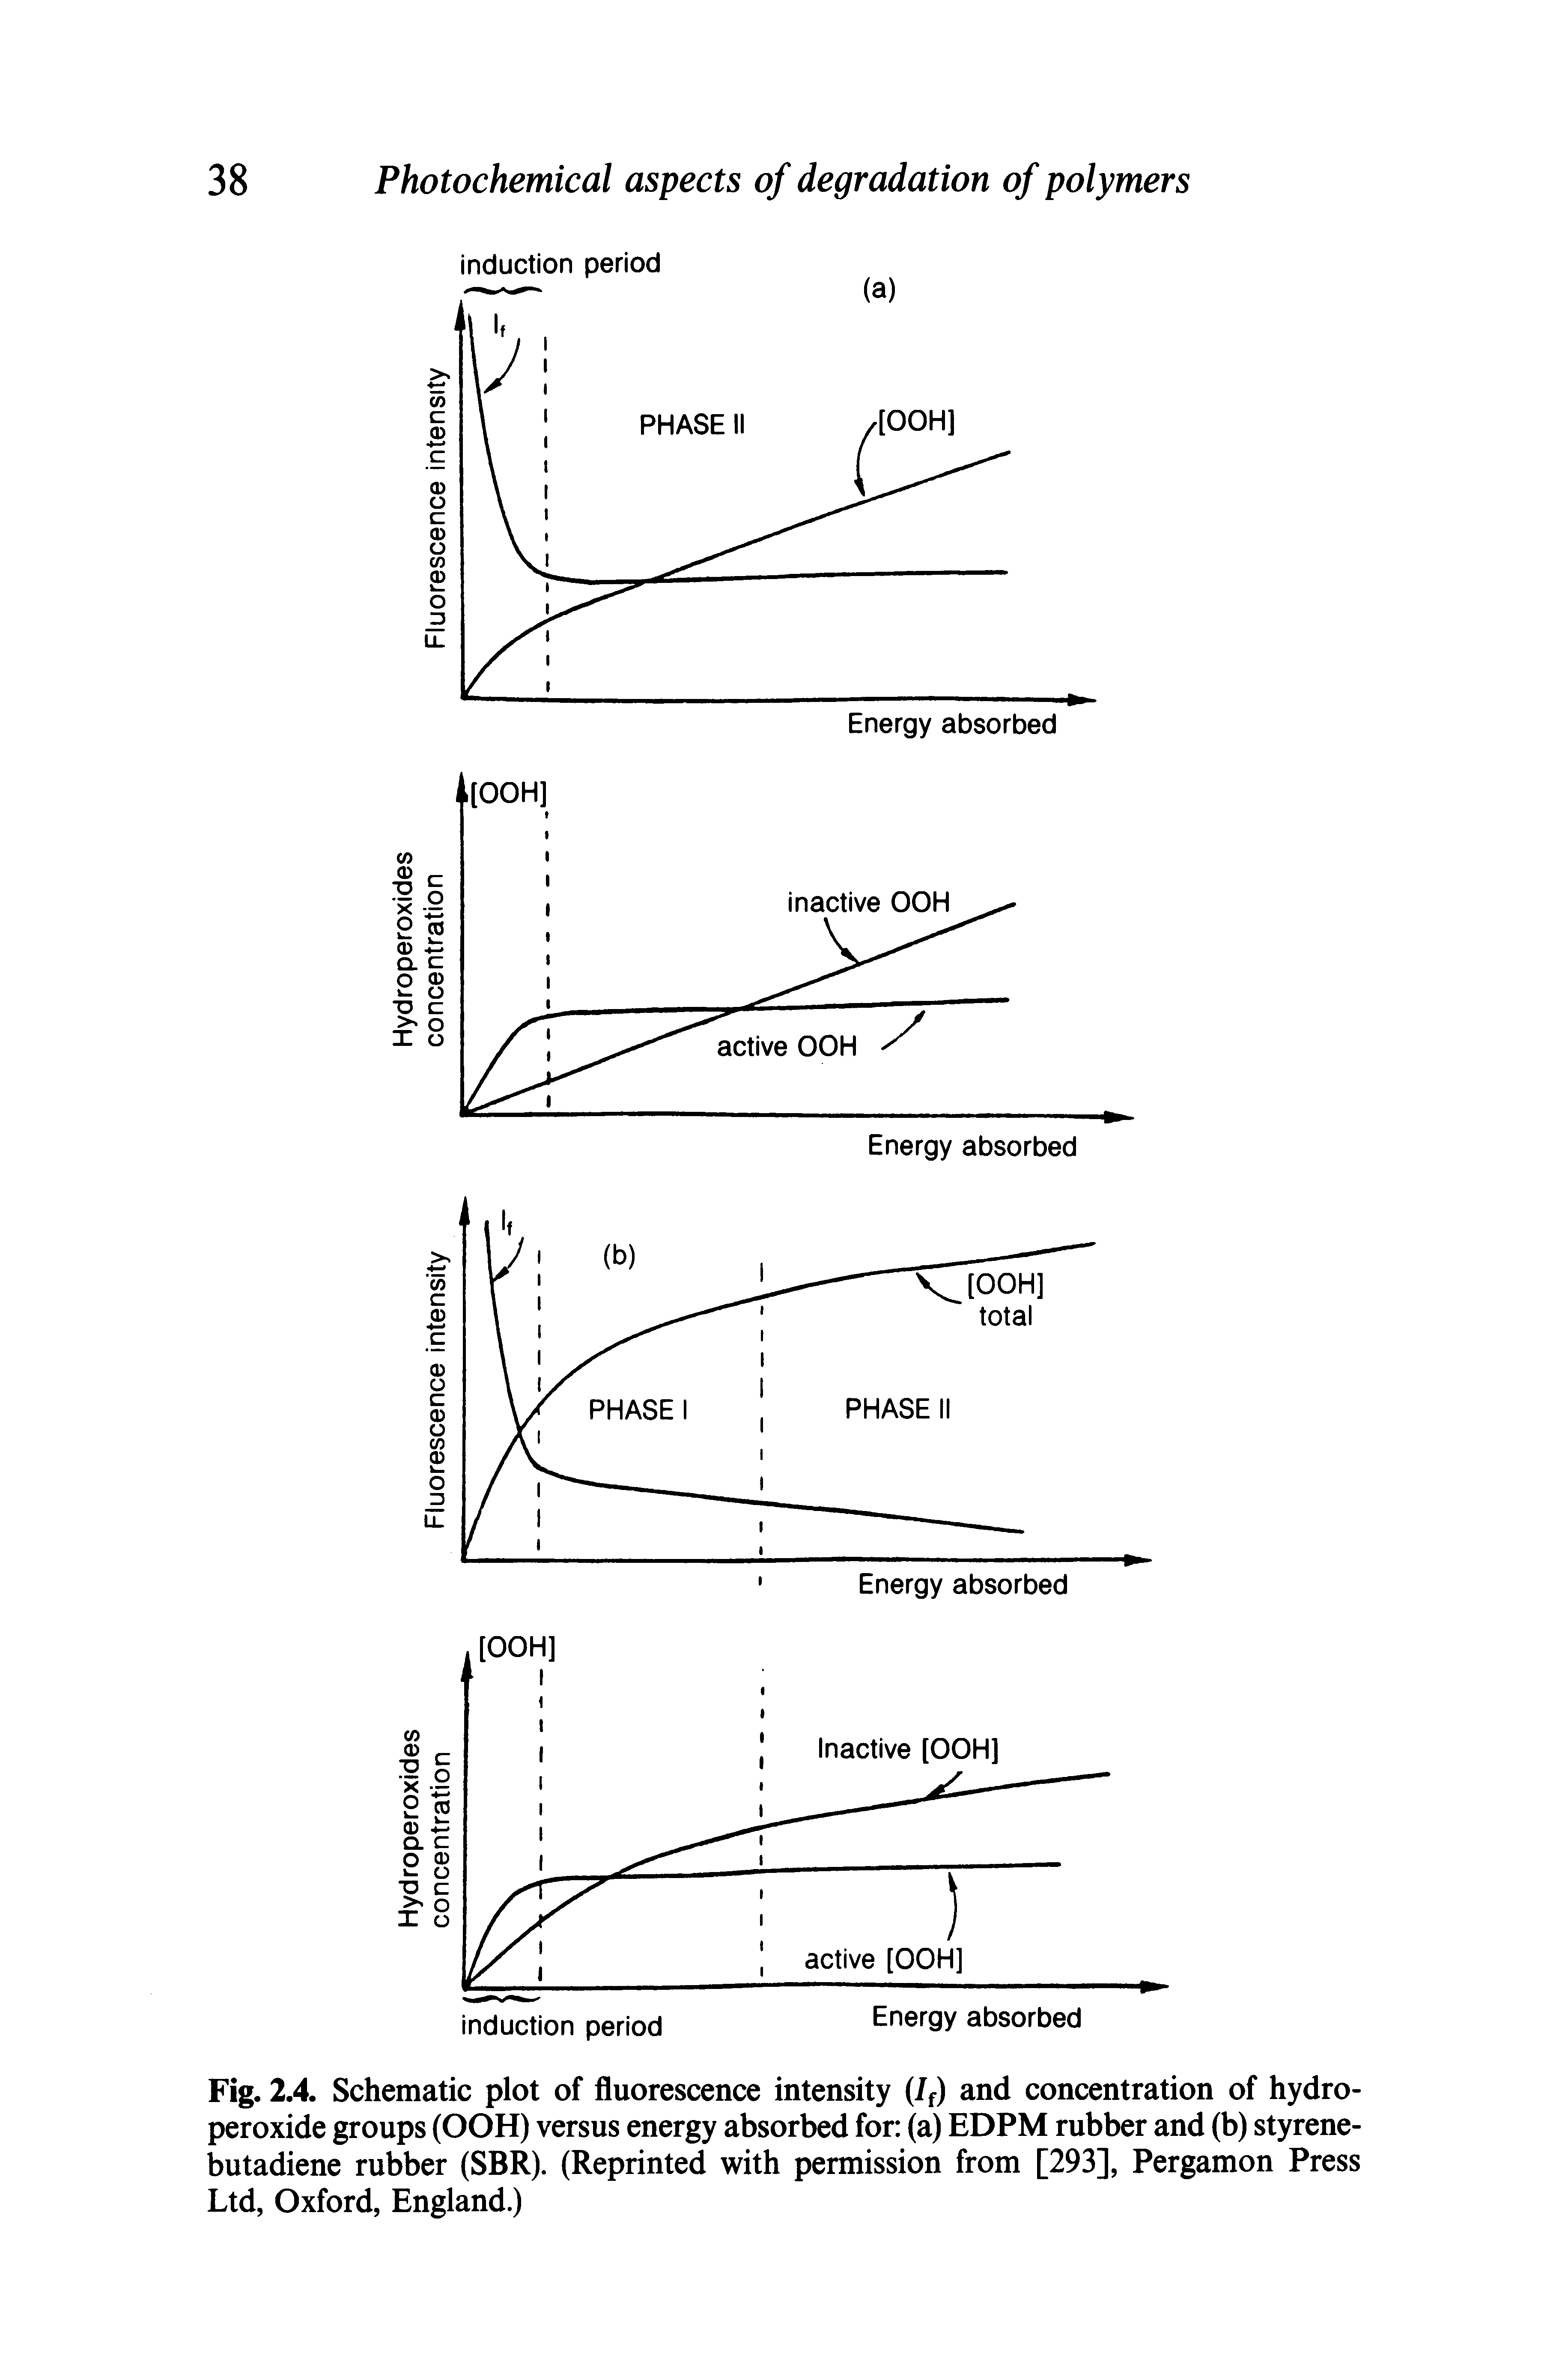 Fig. 2.4. Schematic plot of fluorescence intensity (If) and concentration of hydroperoxide groups (OOH) versus energy absorbed for (a) EDPM rubber and (b) styrene-butadiene rubber (SBR). (Reprinted with permission from [293], Pergamon Press Ltd, Oxford, England.)...